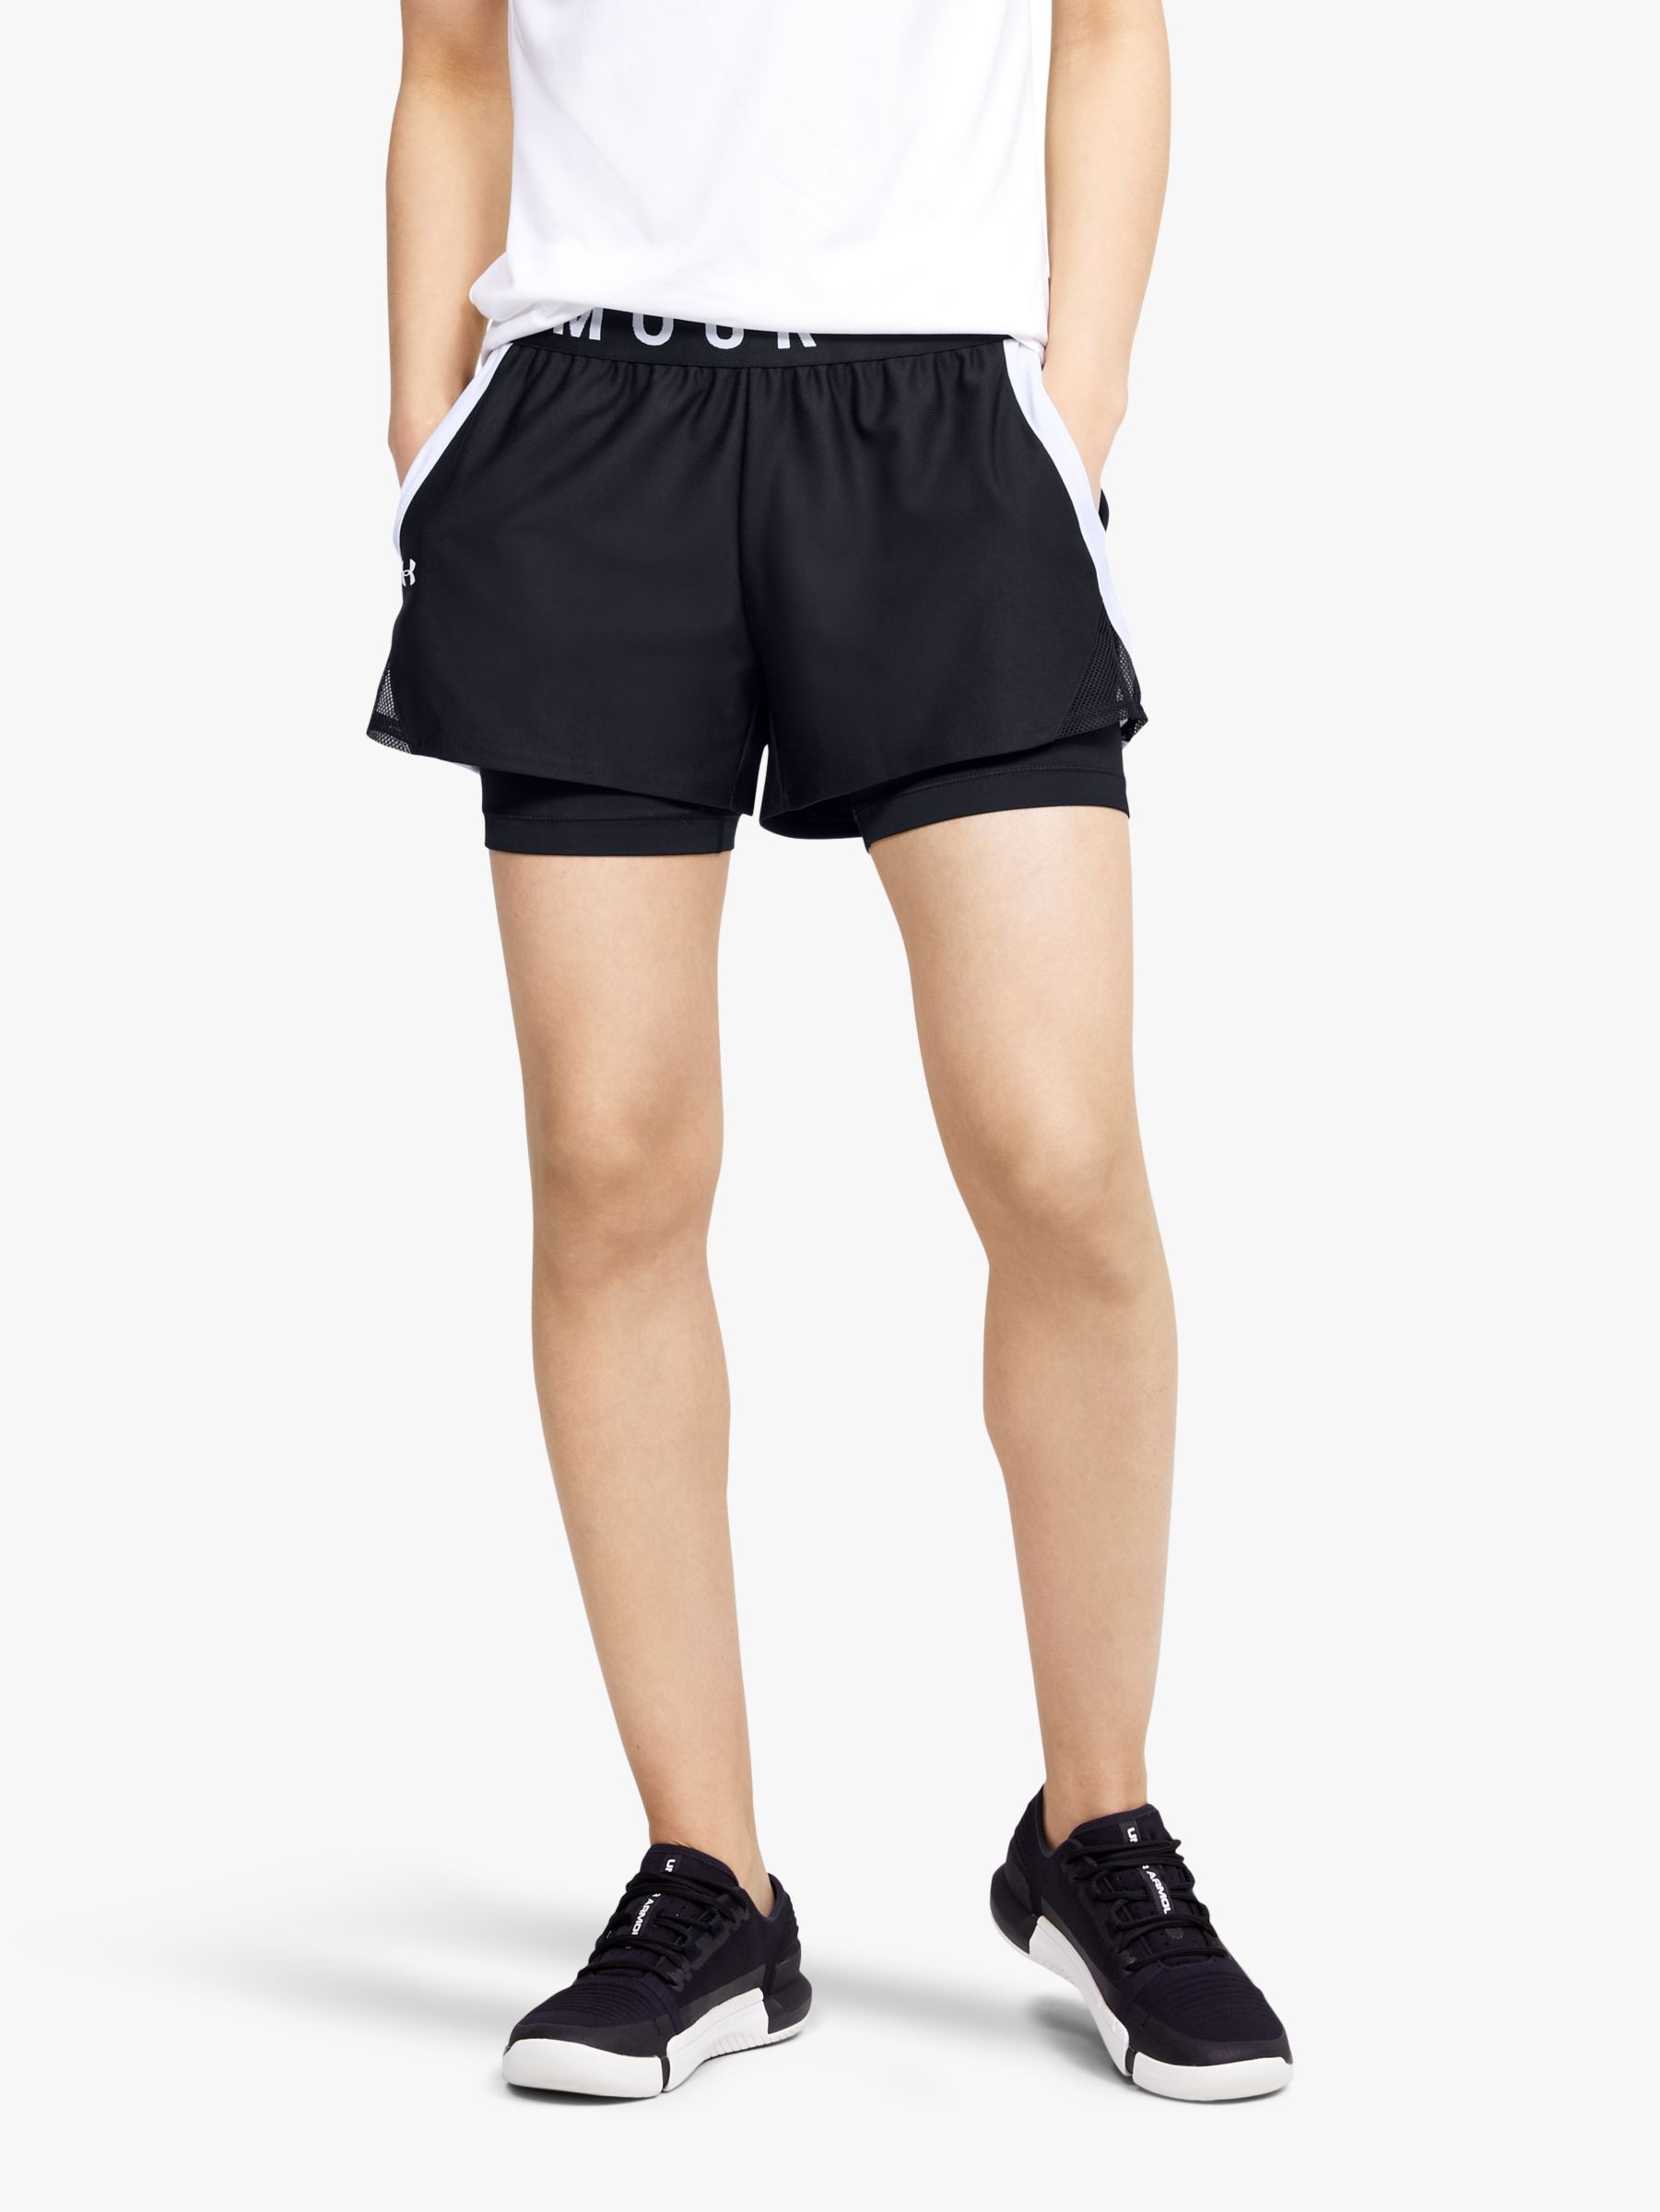 Shorts For Pear Shaped Body